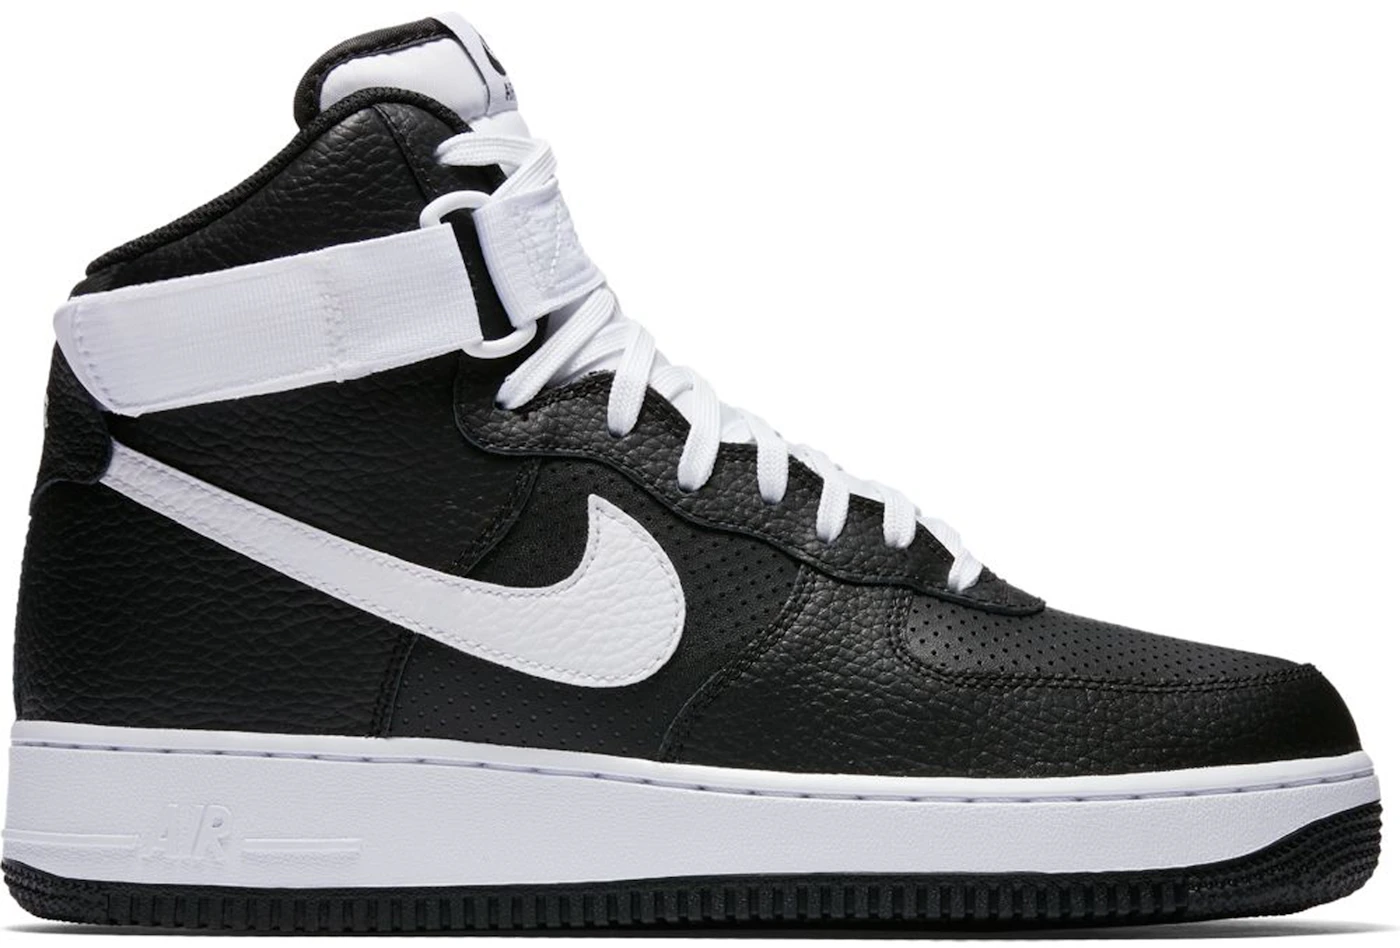 Nike Air Force 1 , 07 Low, Black & White, Mens Shoes, 315122-040